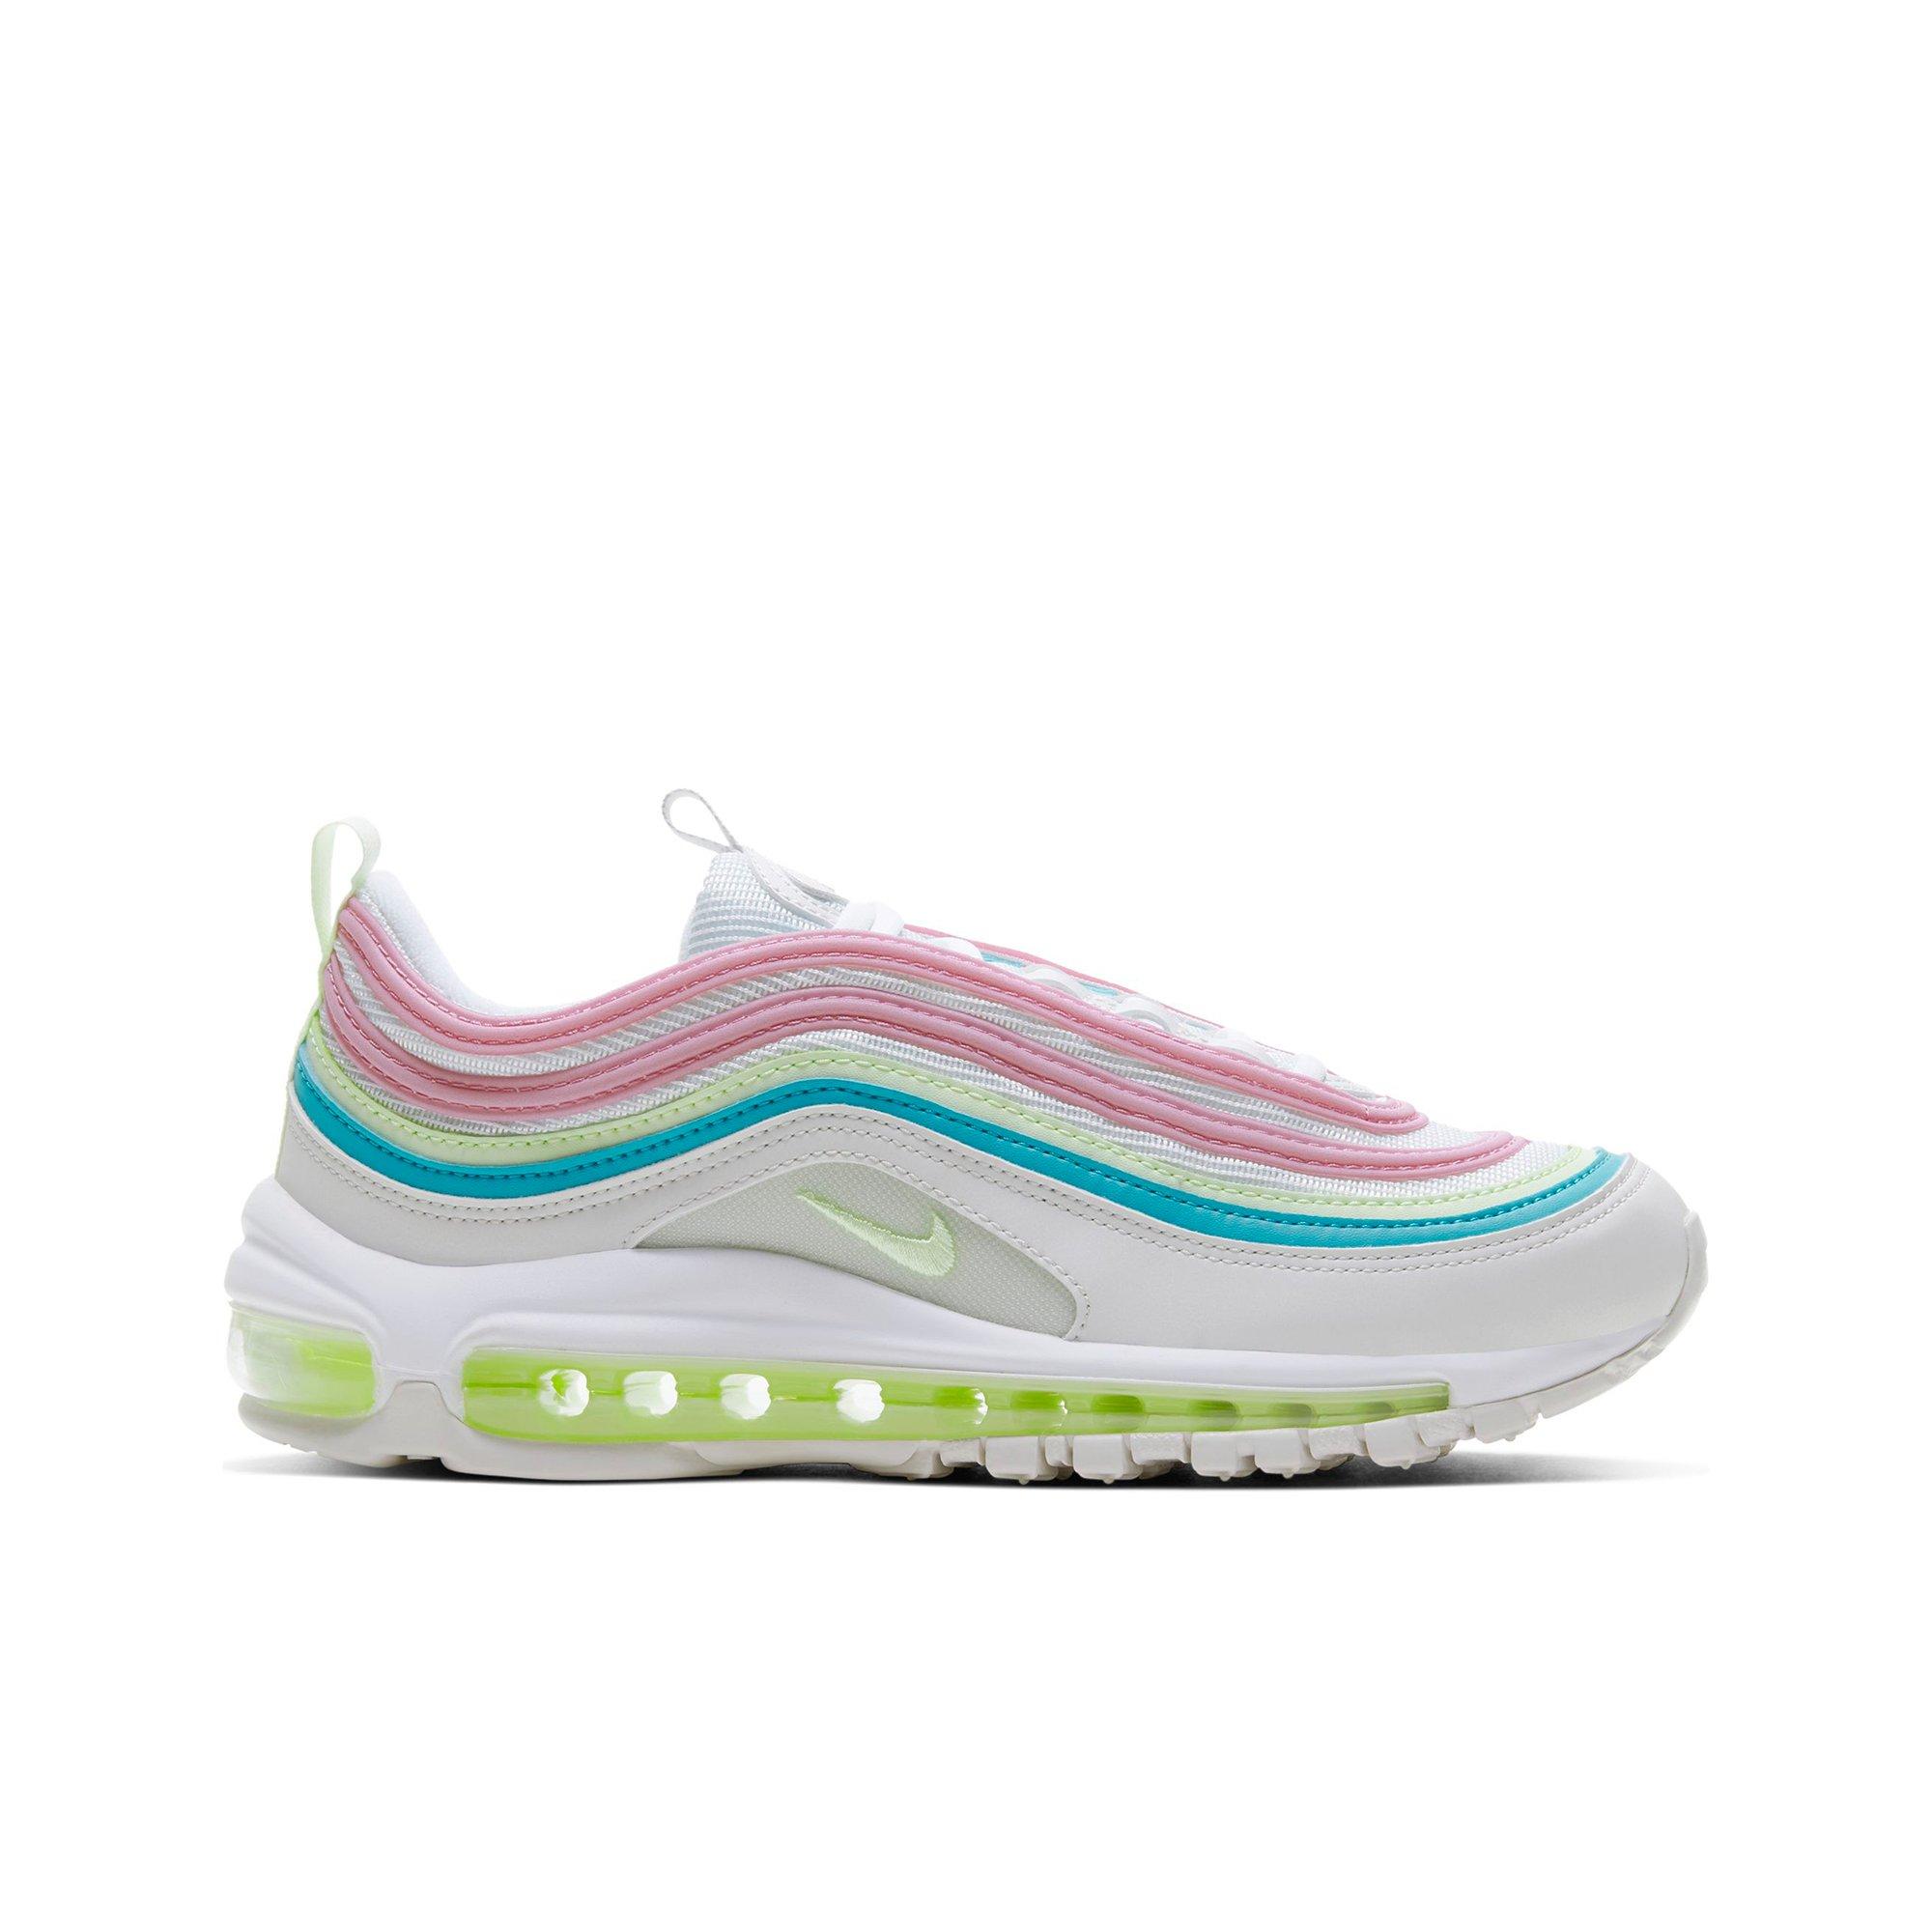 white and pink airmax 97